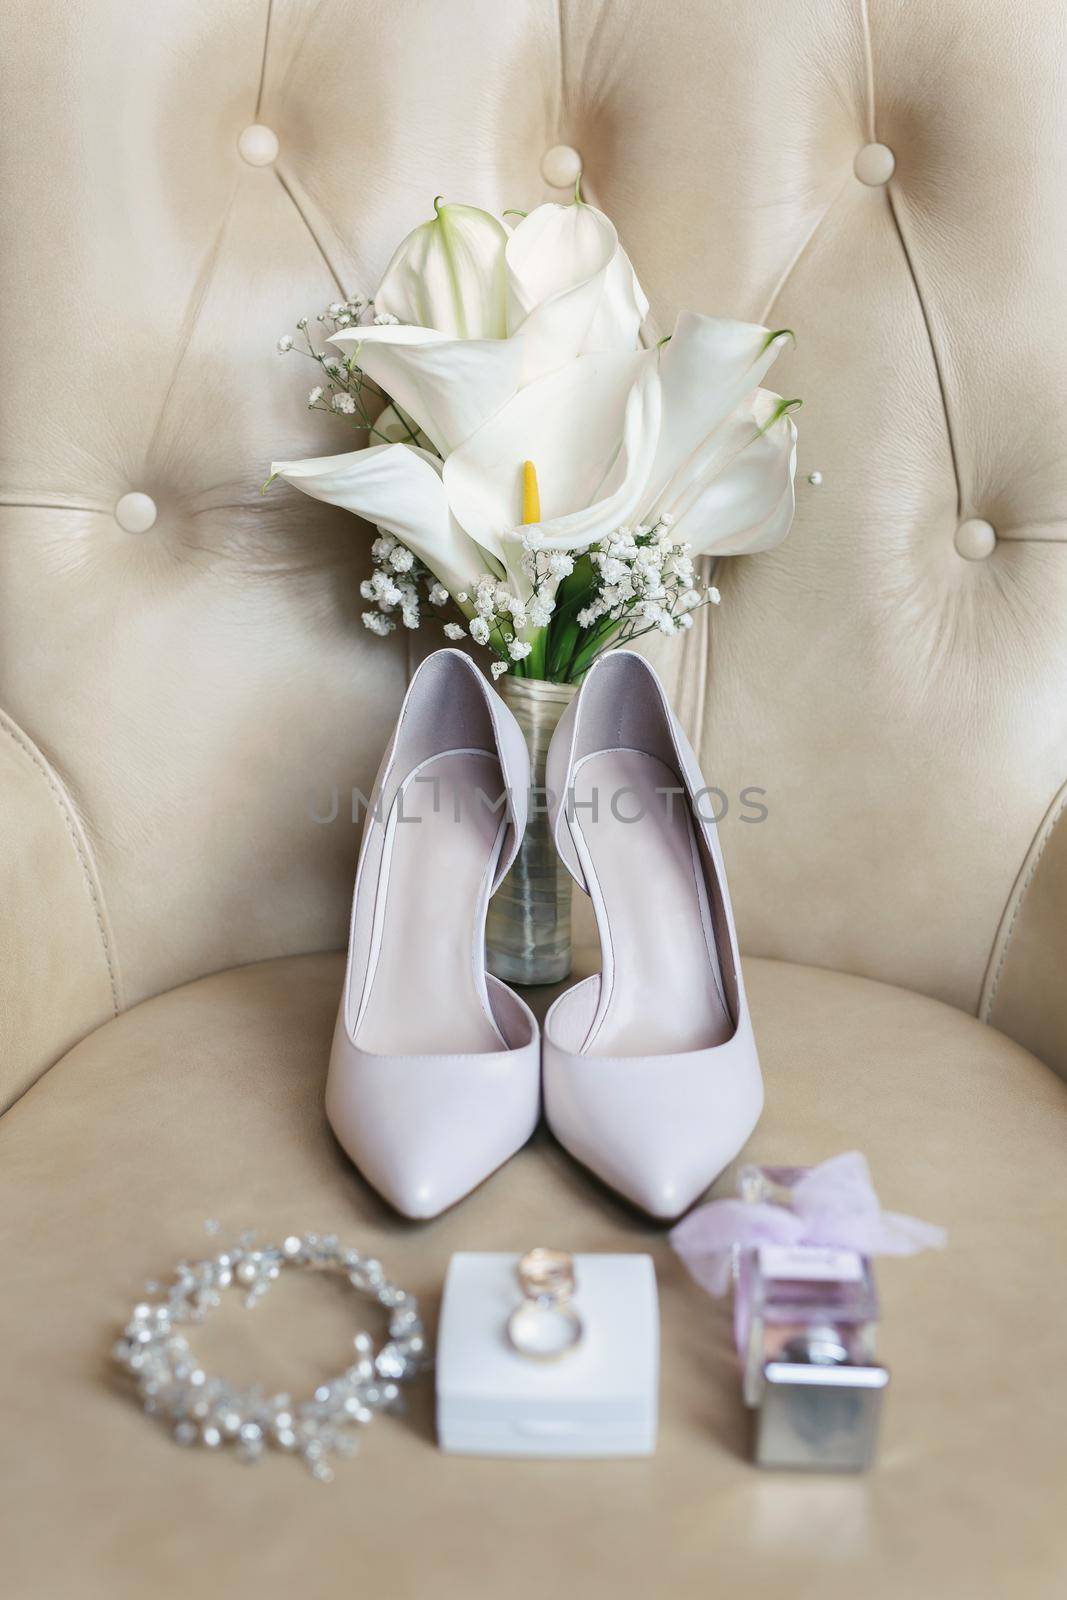 Elegant wedding accessories of the bride in the morning on the day of the celebration by StudioPeace